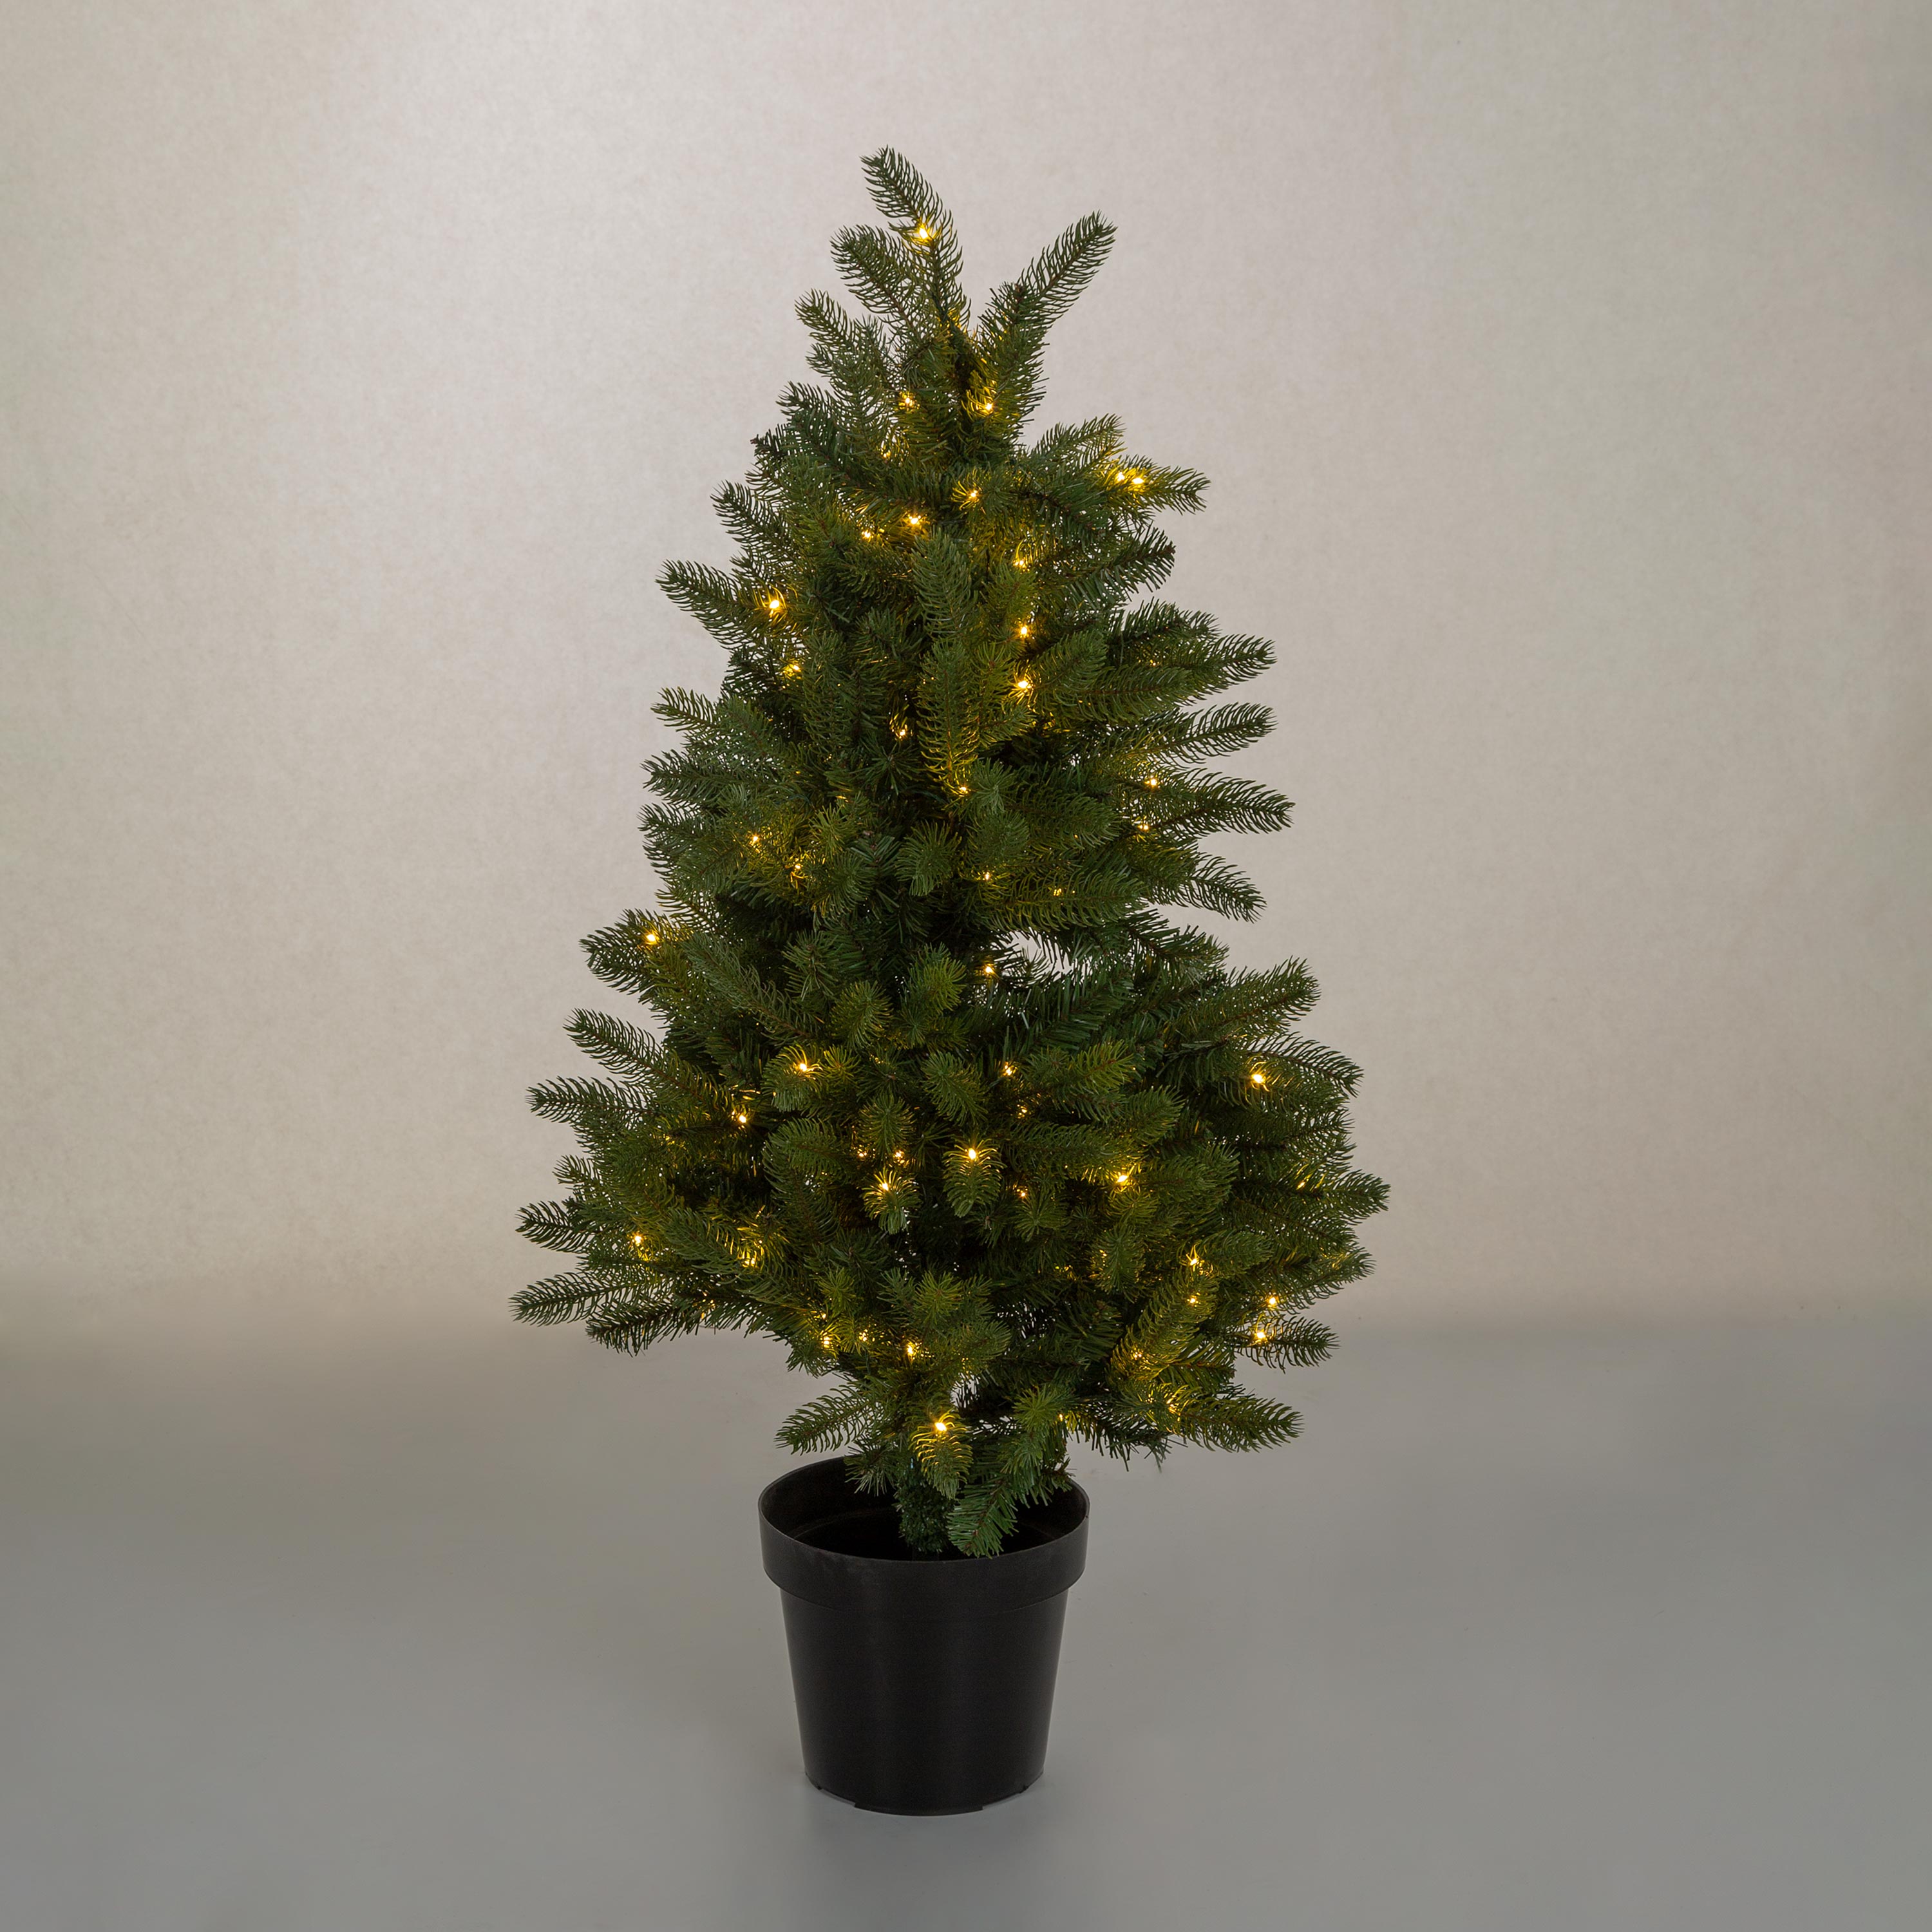 Indoor/Outdoor Keswick Potted Pine Tree with Warm White LEDs